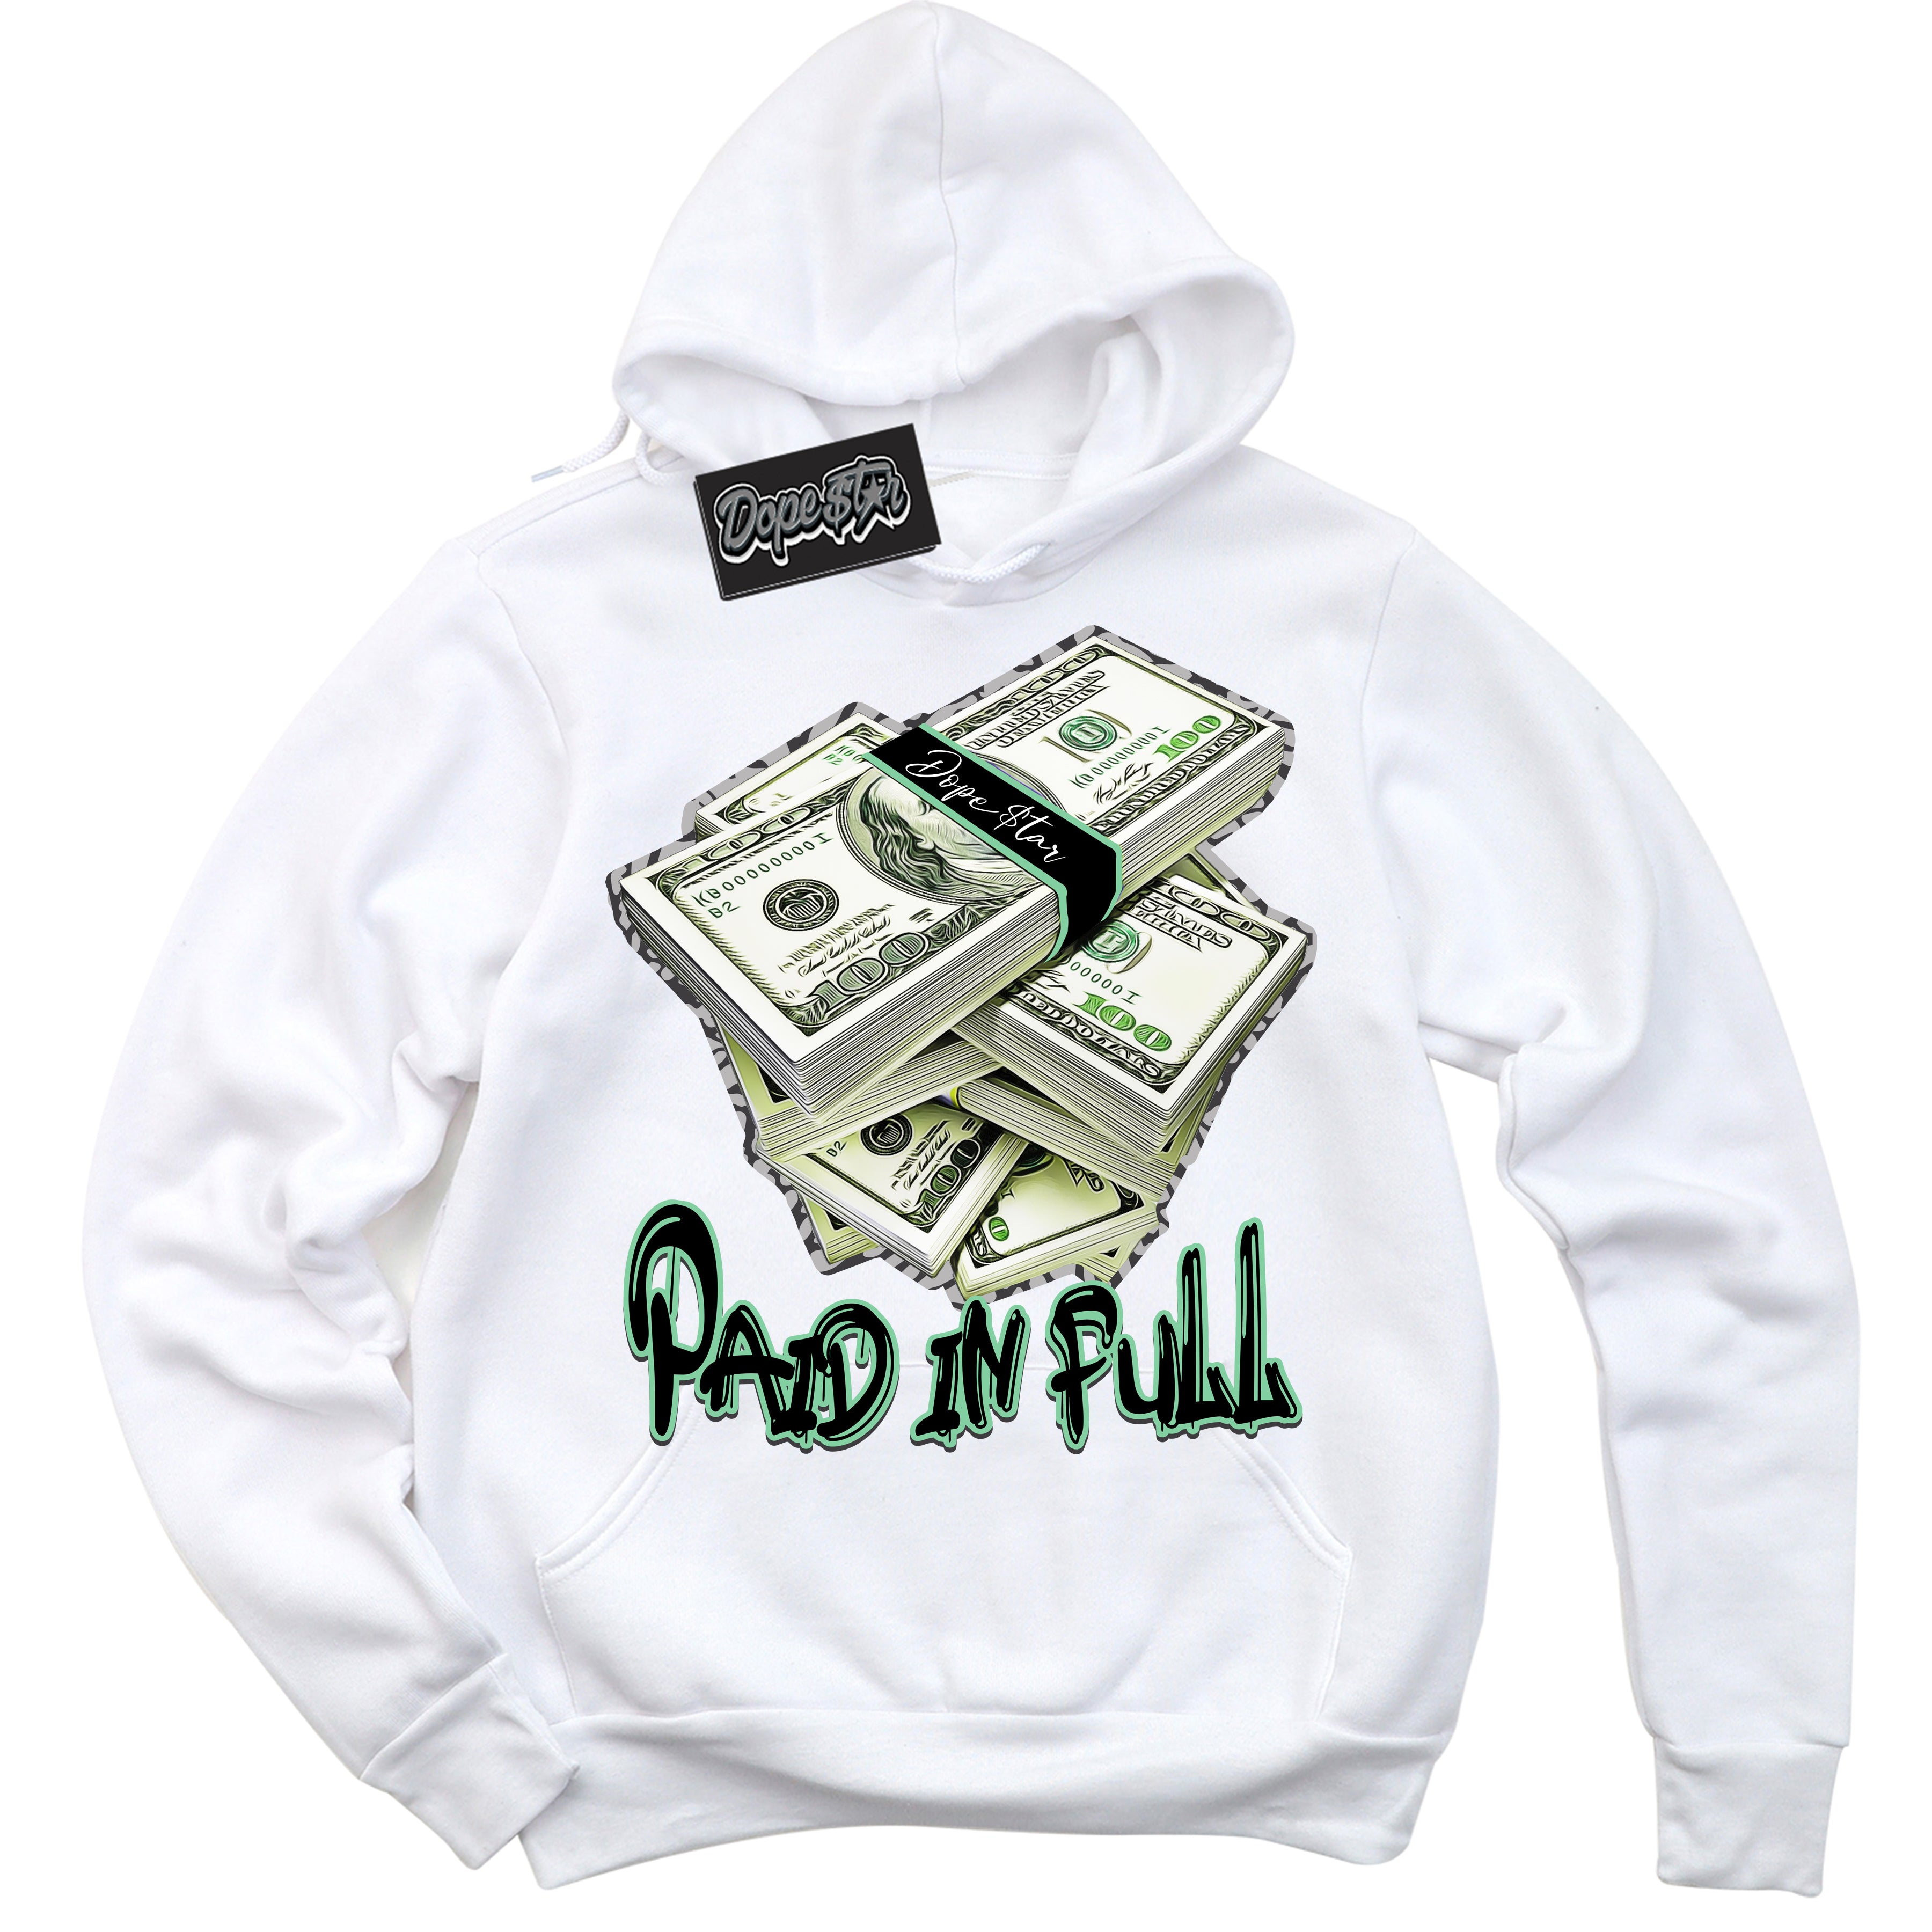 Cool White Graphic DopeStar Hoodie with “ Paid In Full “ print, that perfectly matches Green Glow 3s sneakers